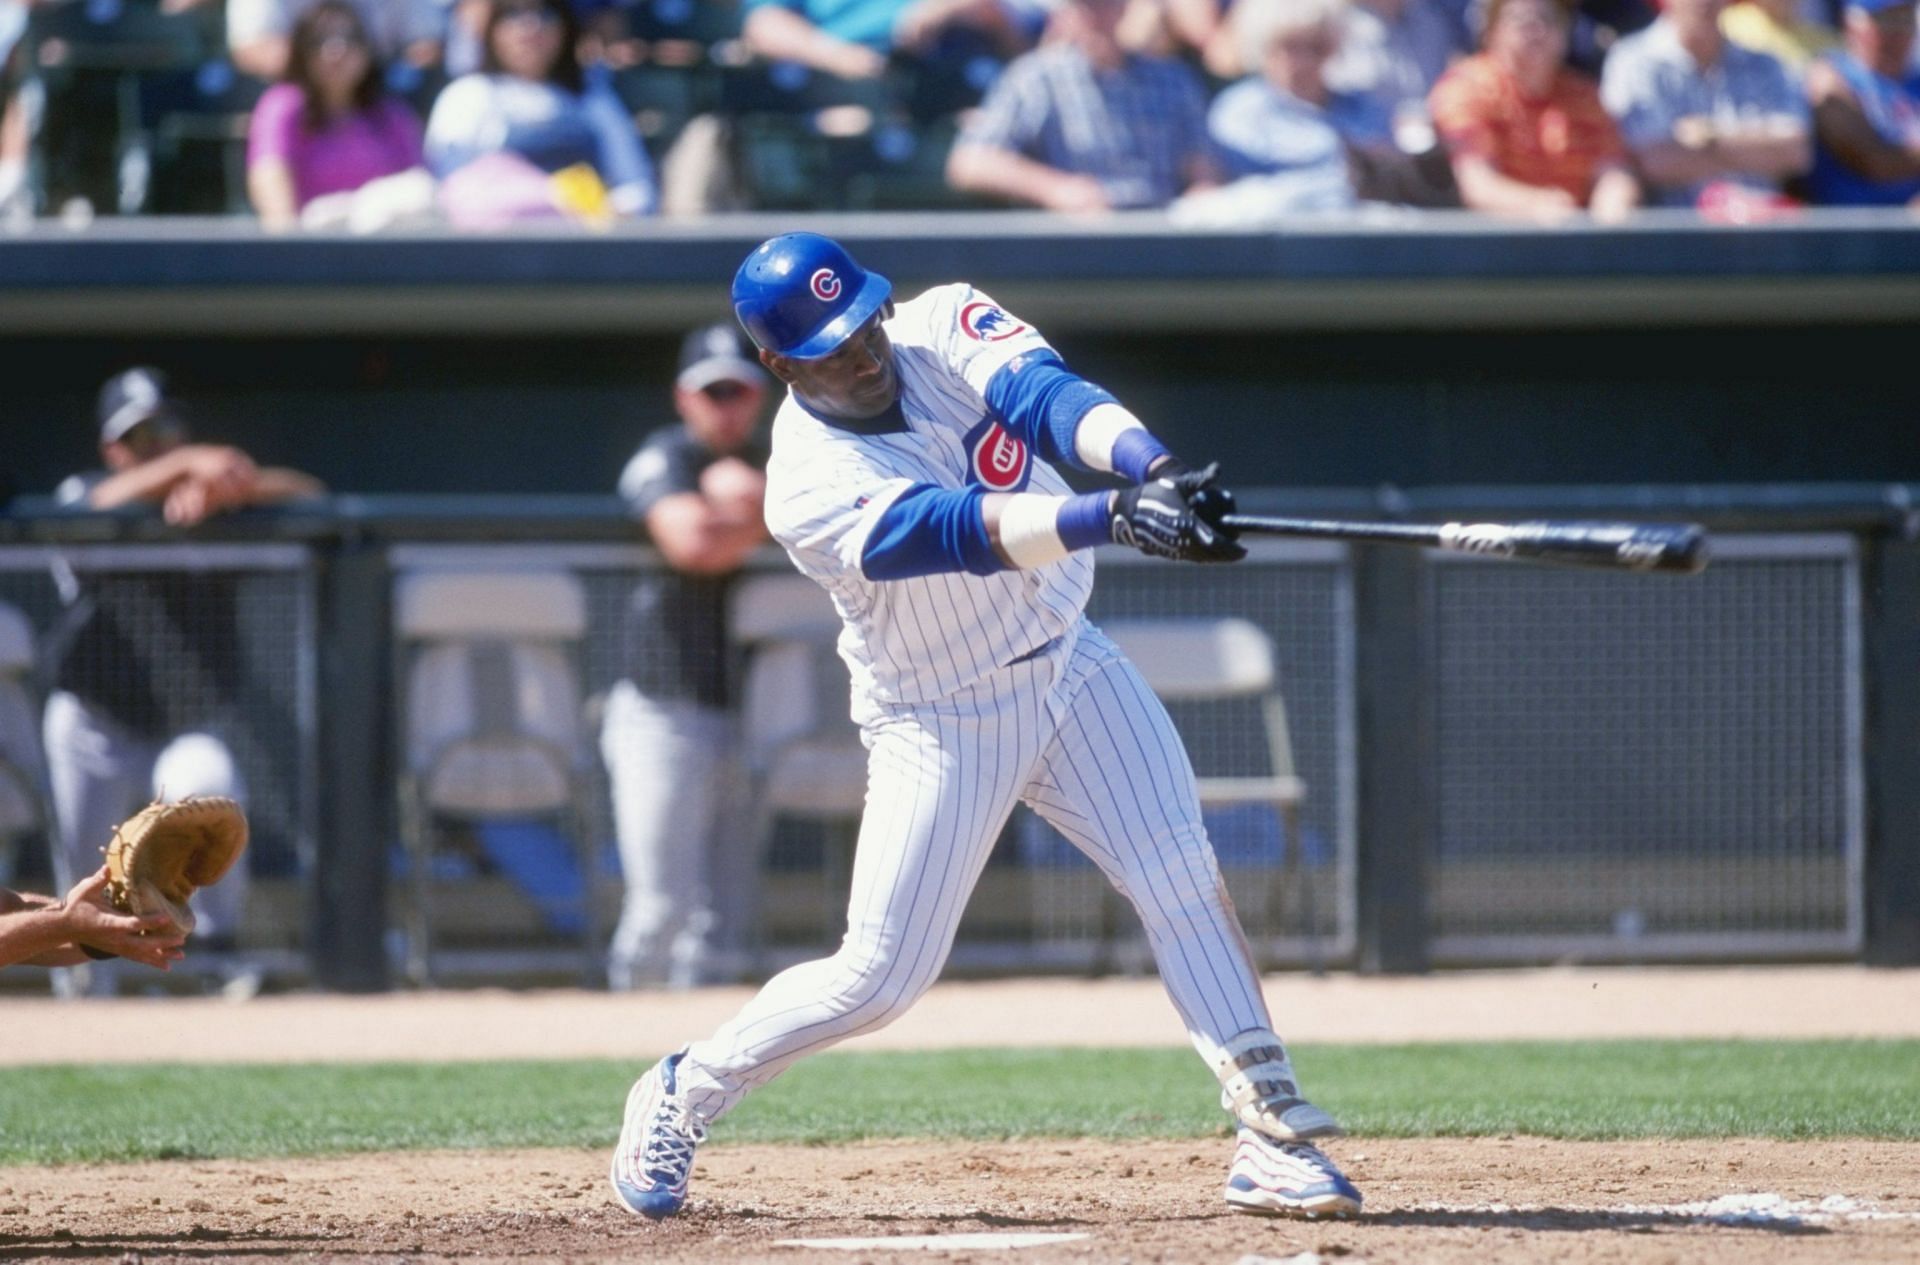 Sammy Sosa: 9 Mar 1999: Outfielder Sammy of the Chicago Cubs swings at the ball during the Spring Training game against the Chicago White Sox at the HoHoKam Park in Mesa, Arizona. The Cubs defeated the White Sox 13-2. Mandatory Credit: Stephen Dunn /Allsport